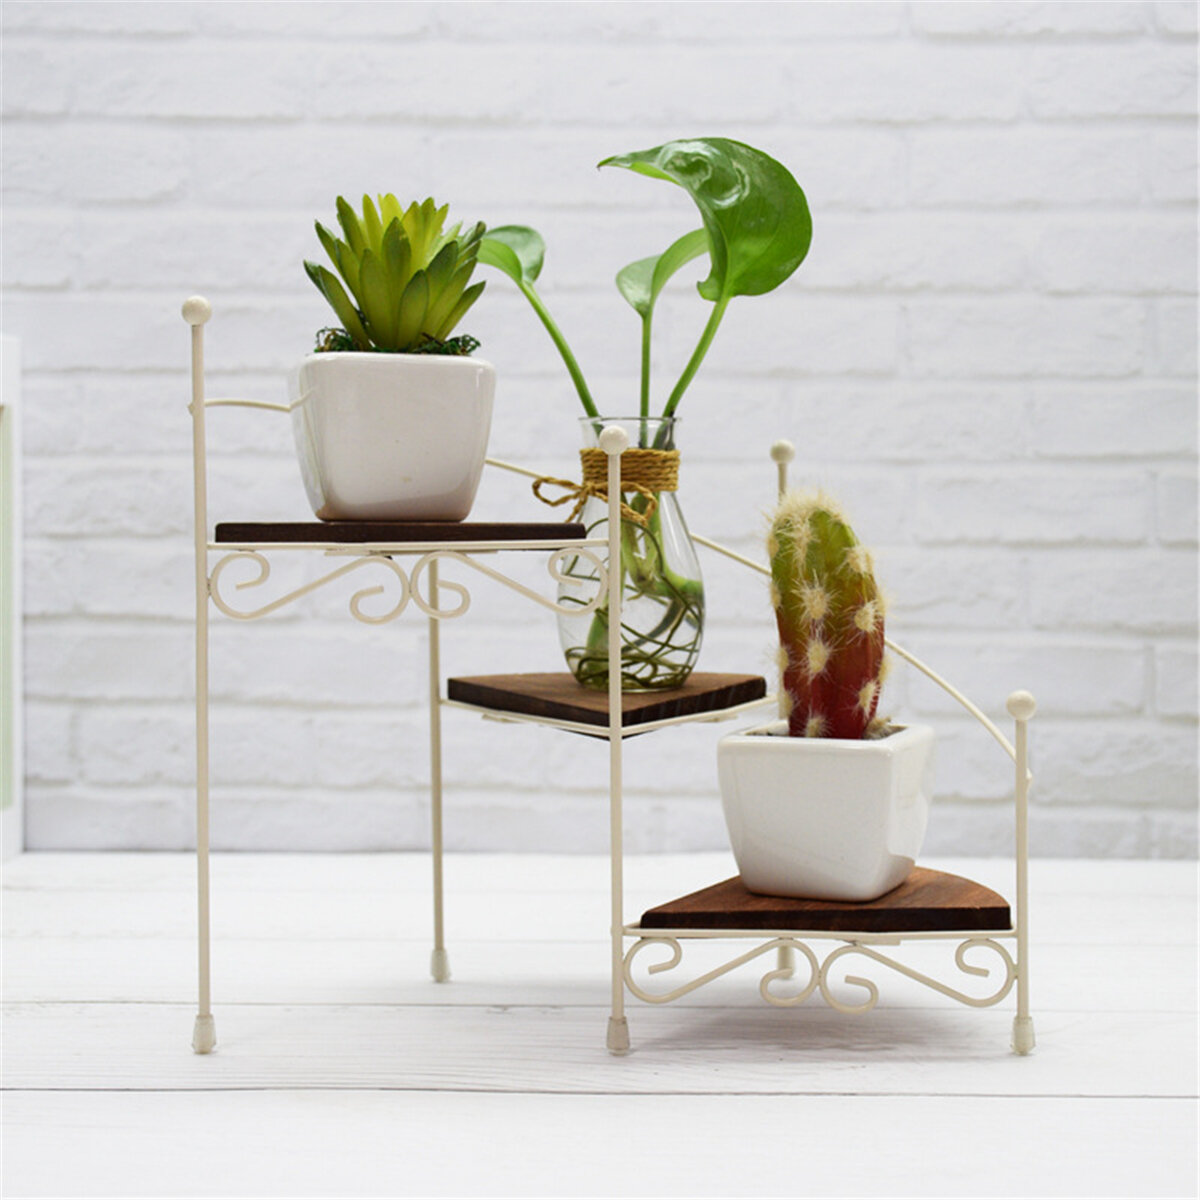 

3 Tiers Ladder Plant Stand Flower Shelf Bookshelf Standing Flower Potted Plant Holder Display Outdoor Decorations Stand